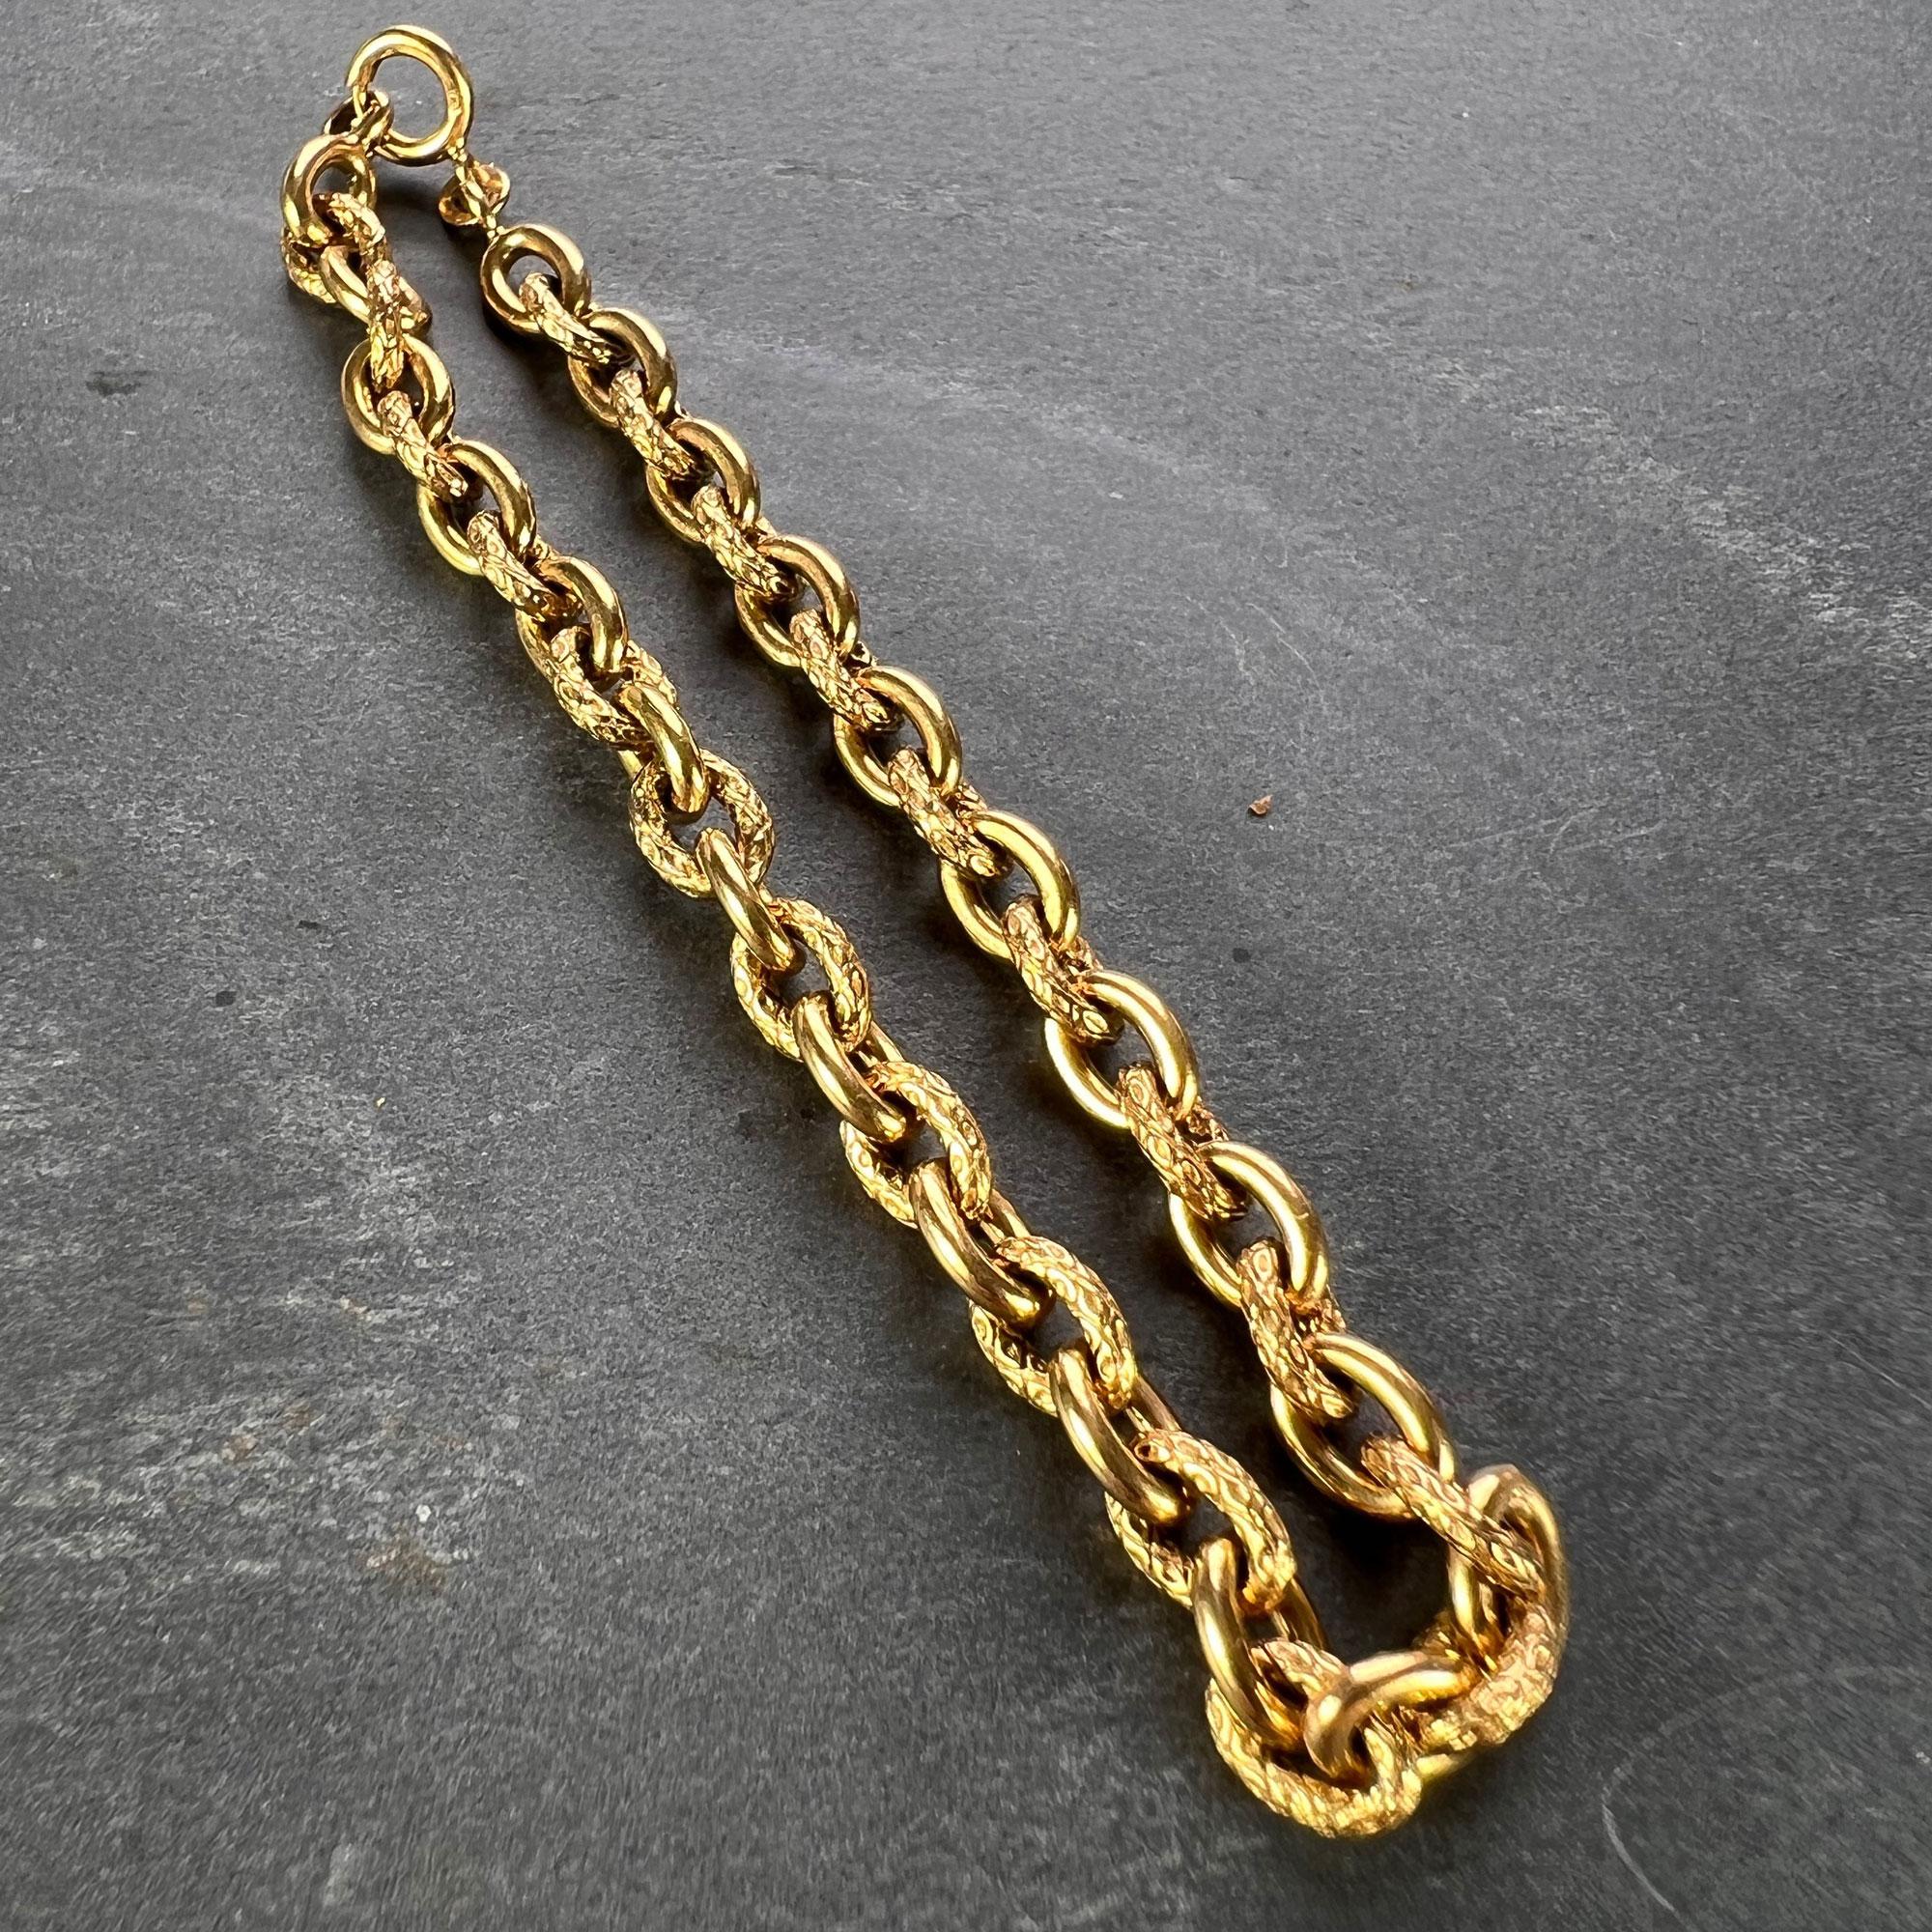 An 18 karat (18K) yellow gold cable link bracelet with alternating textured and smooth links. Marked 750 to the spring ring for 18 karat gold, with French import marks. 7 inches long.

Dimensions: 18 x 0.5 x 0.5 cm
Weight: 14.41 grams 